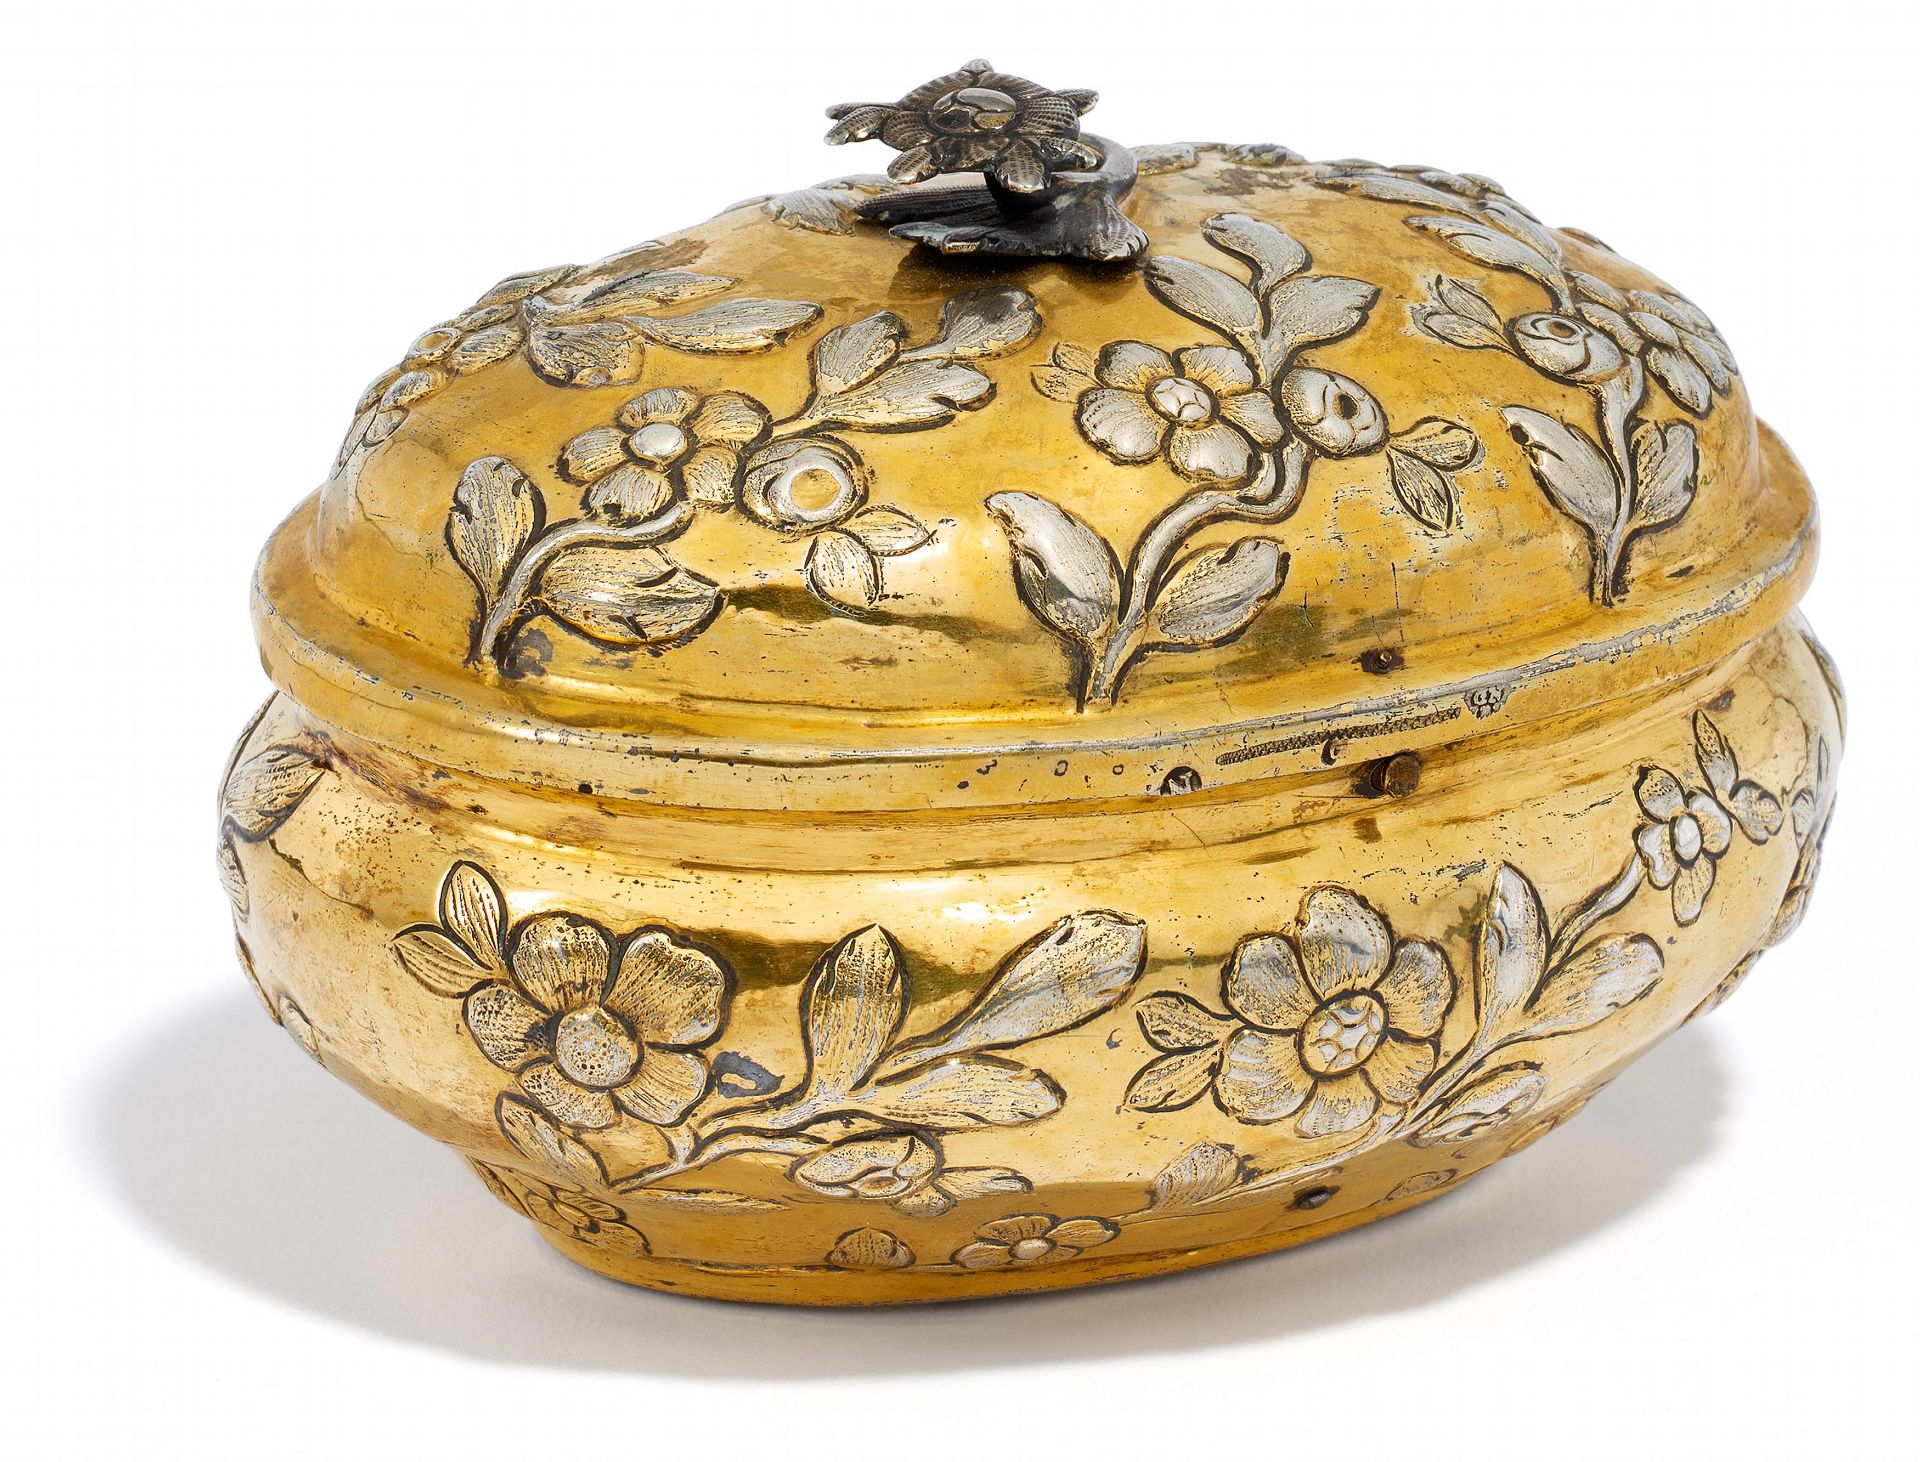 PARTLY GILDED SILVER SUGAR BOWL WITH BLOSSOMING TWIGS AND GOLD-PLATED INSIDE. Nuremberg. 1775-77.